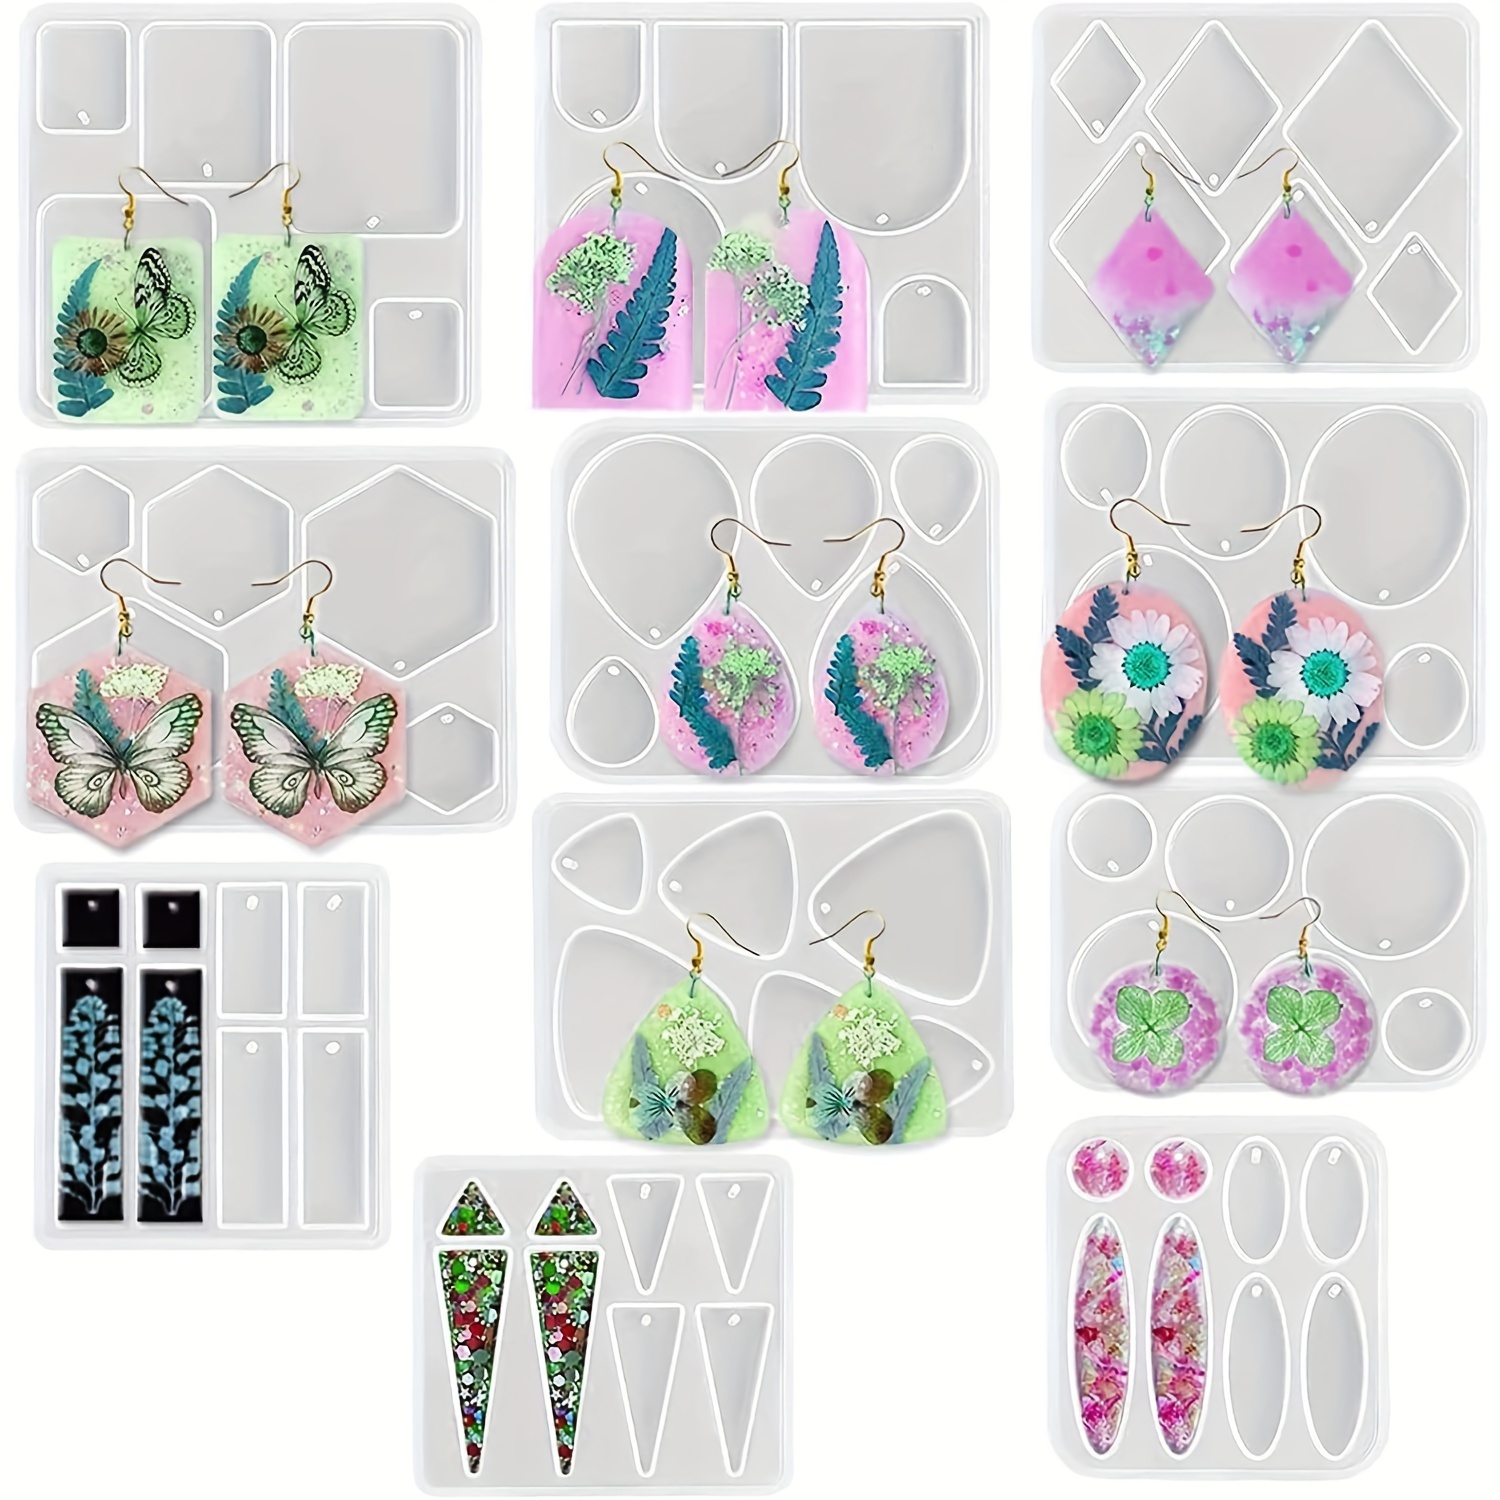 

Diy Resin Earrings Pendant Silicone Casting Mold Geometric Pendant Keychain Jewelry Making Arch Oval Hexagon Teardrop Epoxy Resin Mold For Diy Jewelry Pendant Casting Kit